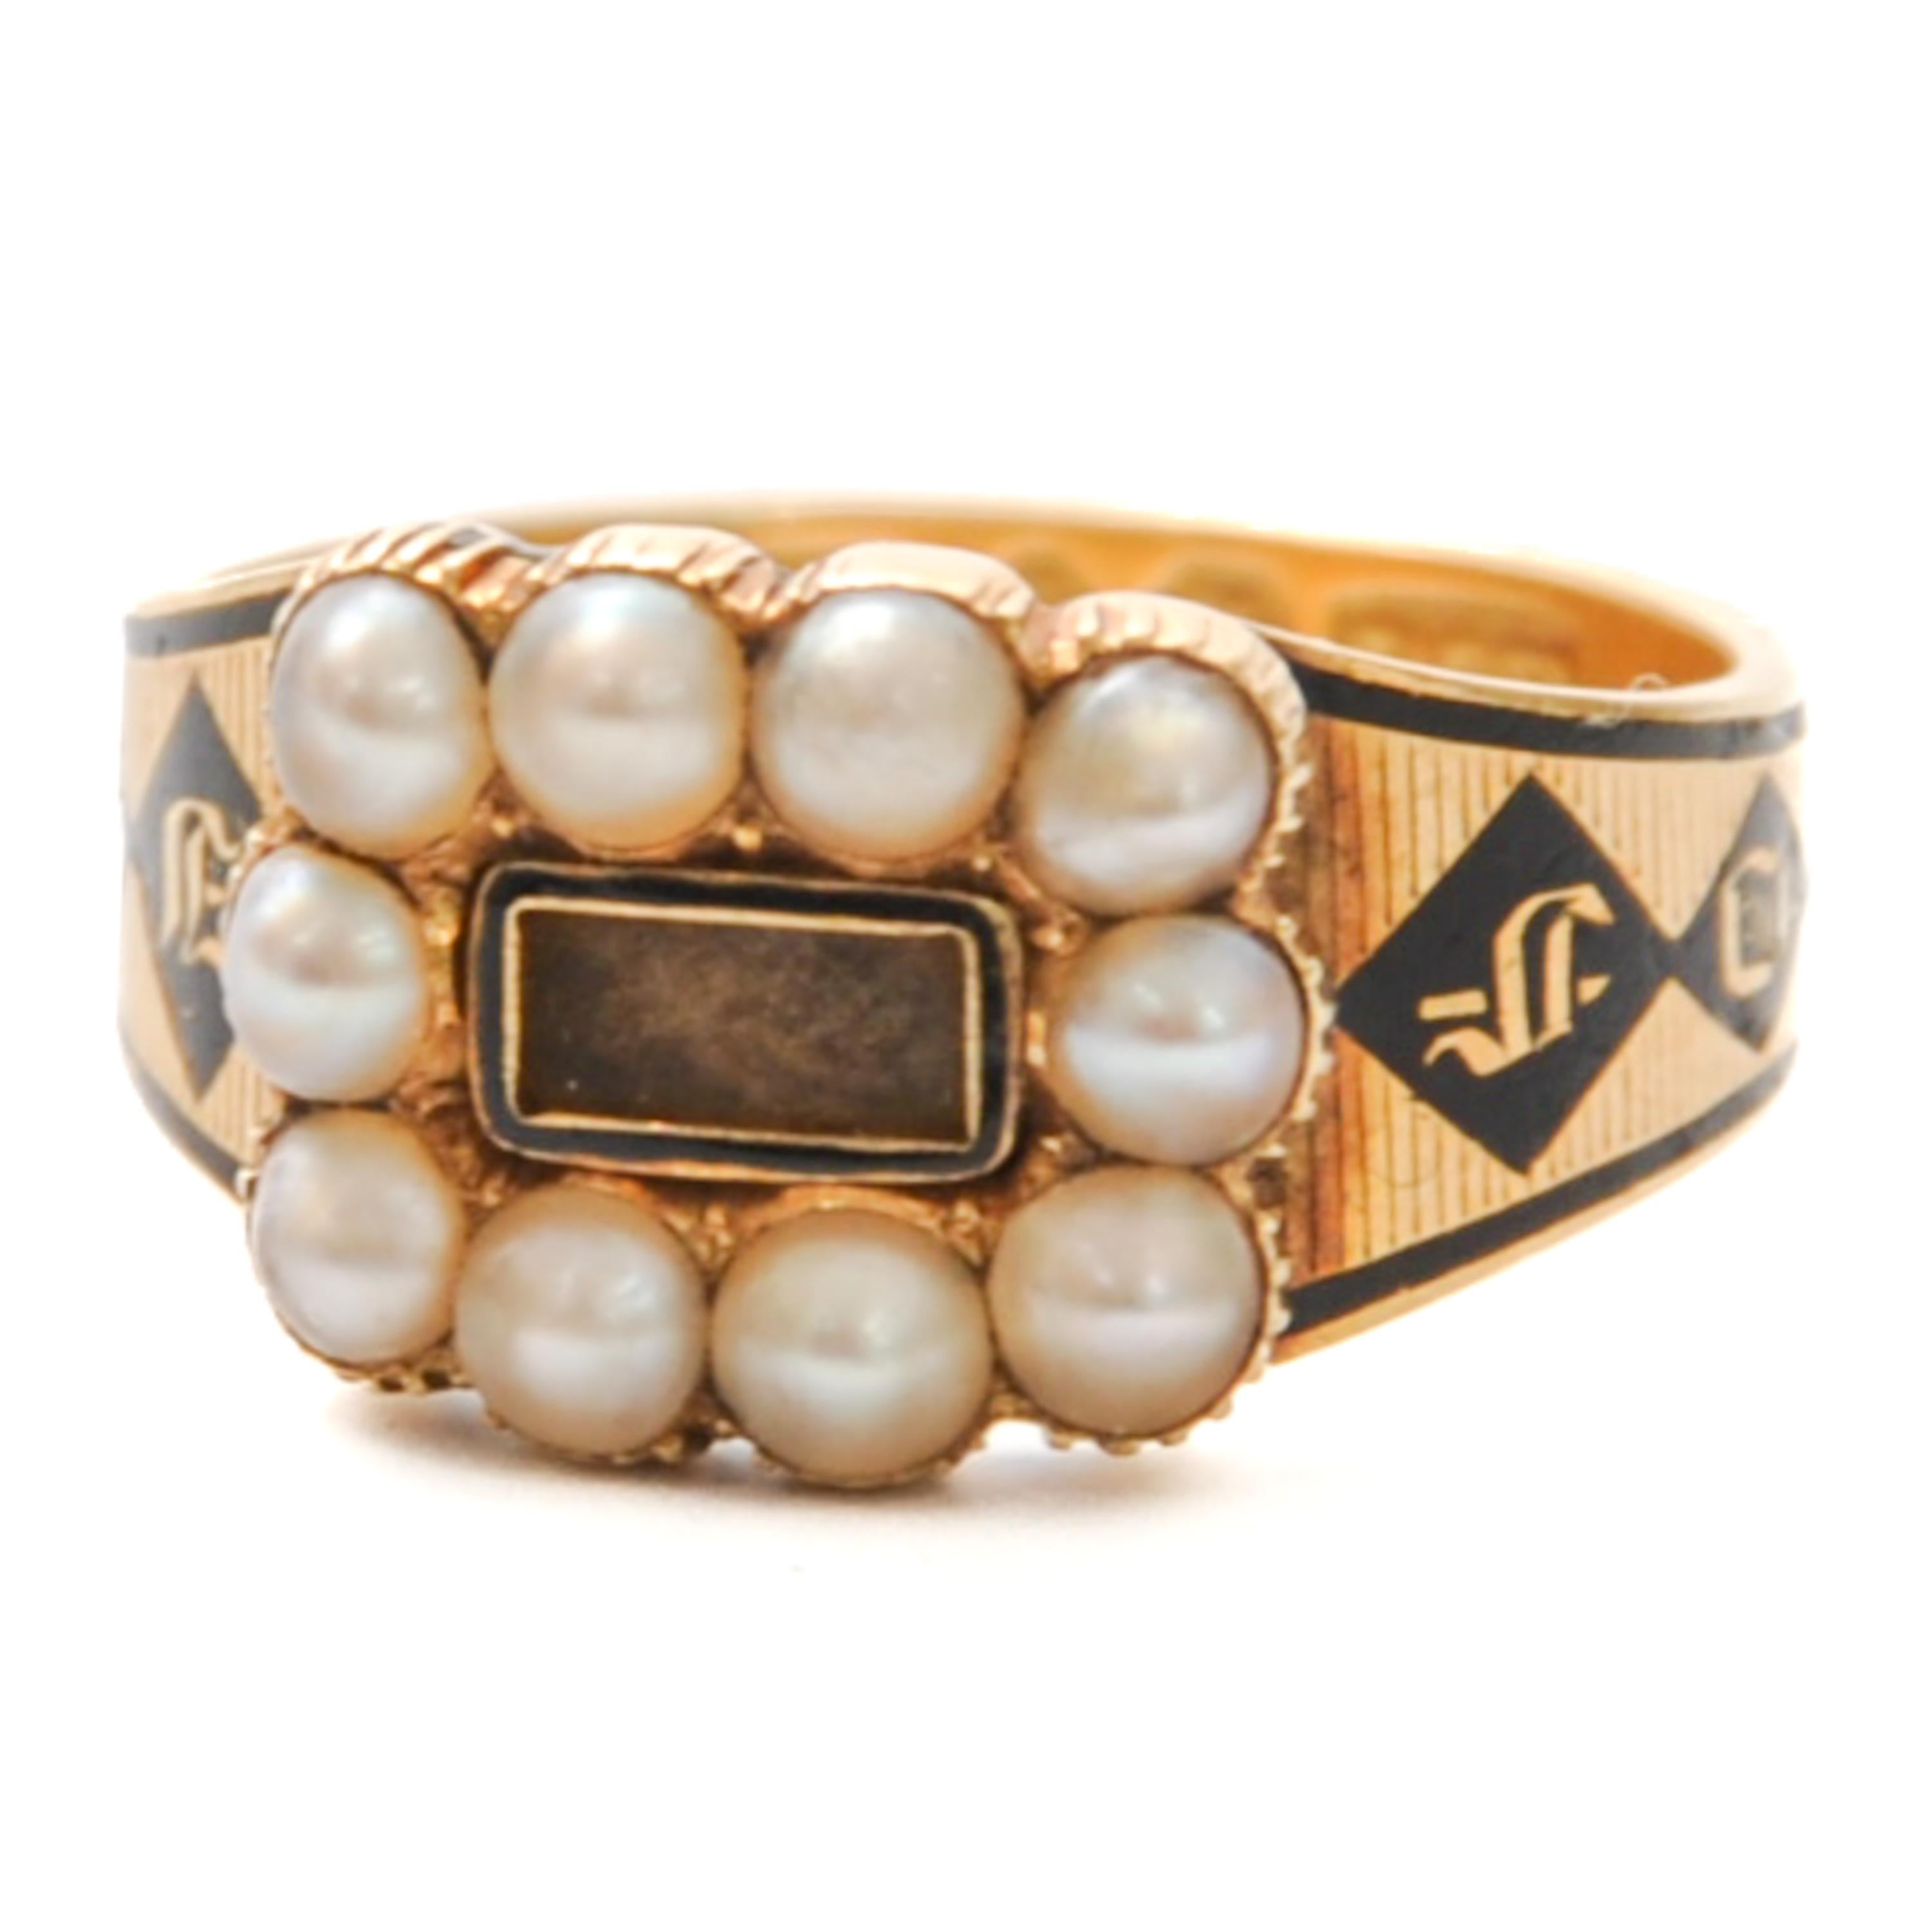 An exquisite relic of the past, this antique 18K gold memorial ring from 1831 with pearls and black enamel is a testament to the elegance and sentimentality of bygone eras. Crafted with meticulous care and attention to detail, this ring exudes both